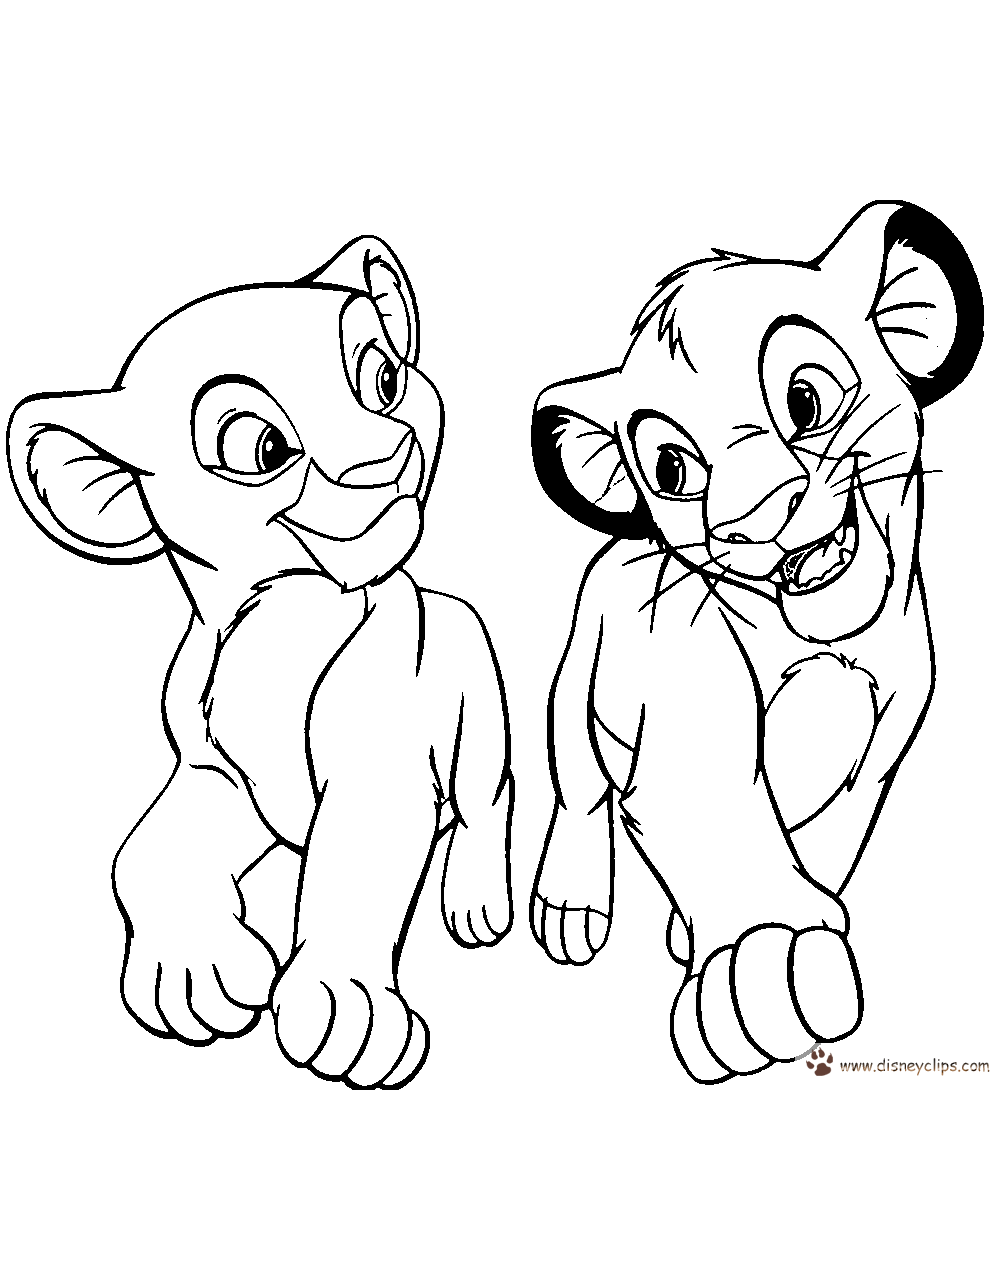 The Lion King Coloring Pages 2 | Disneyclips.com